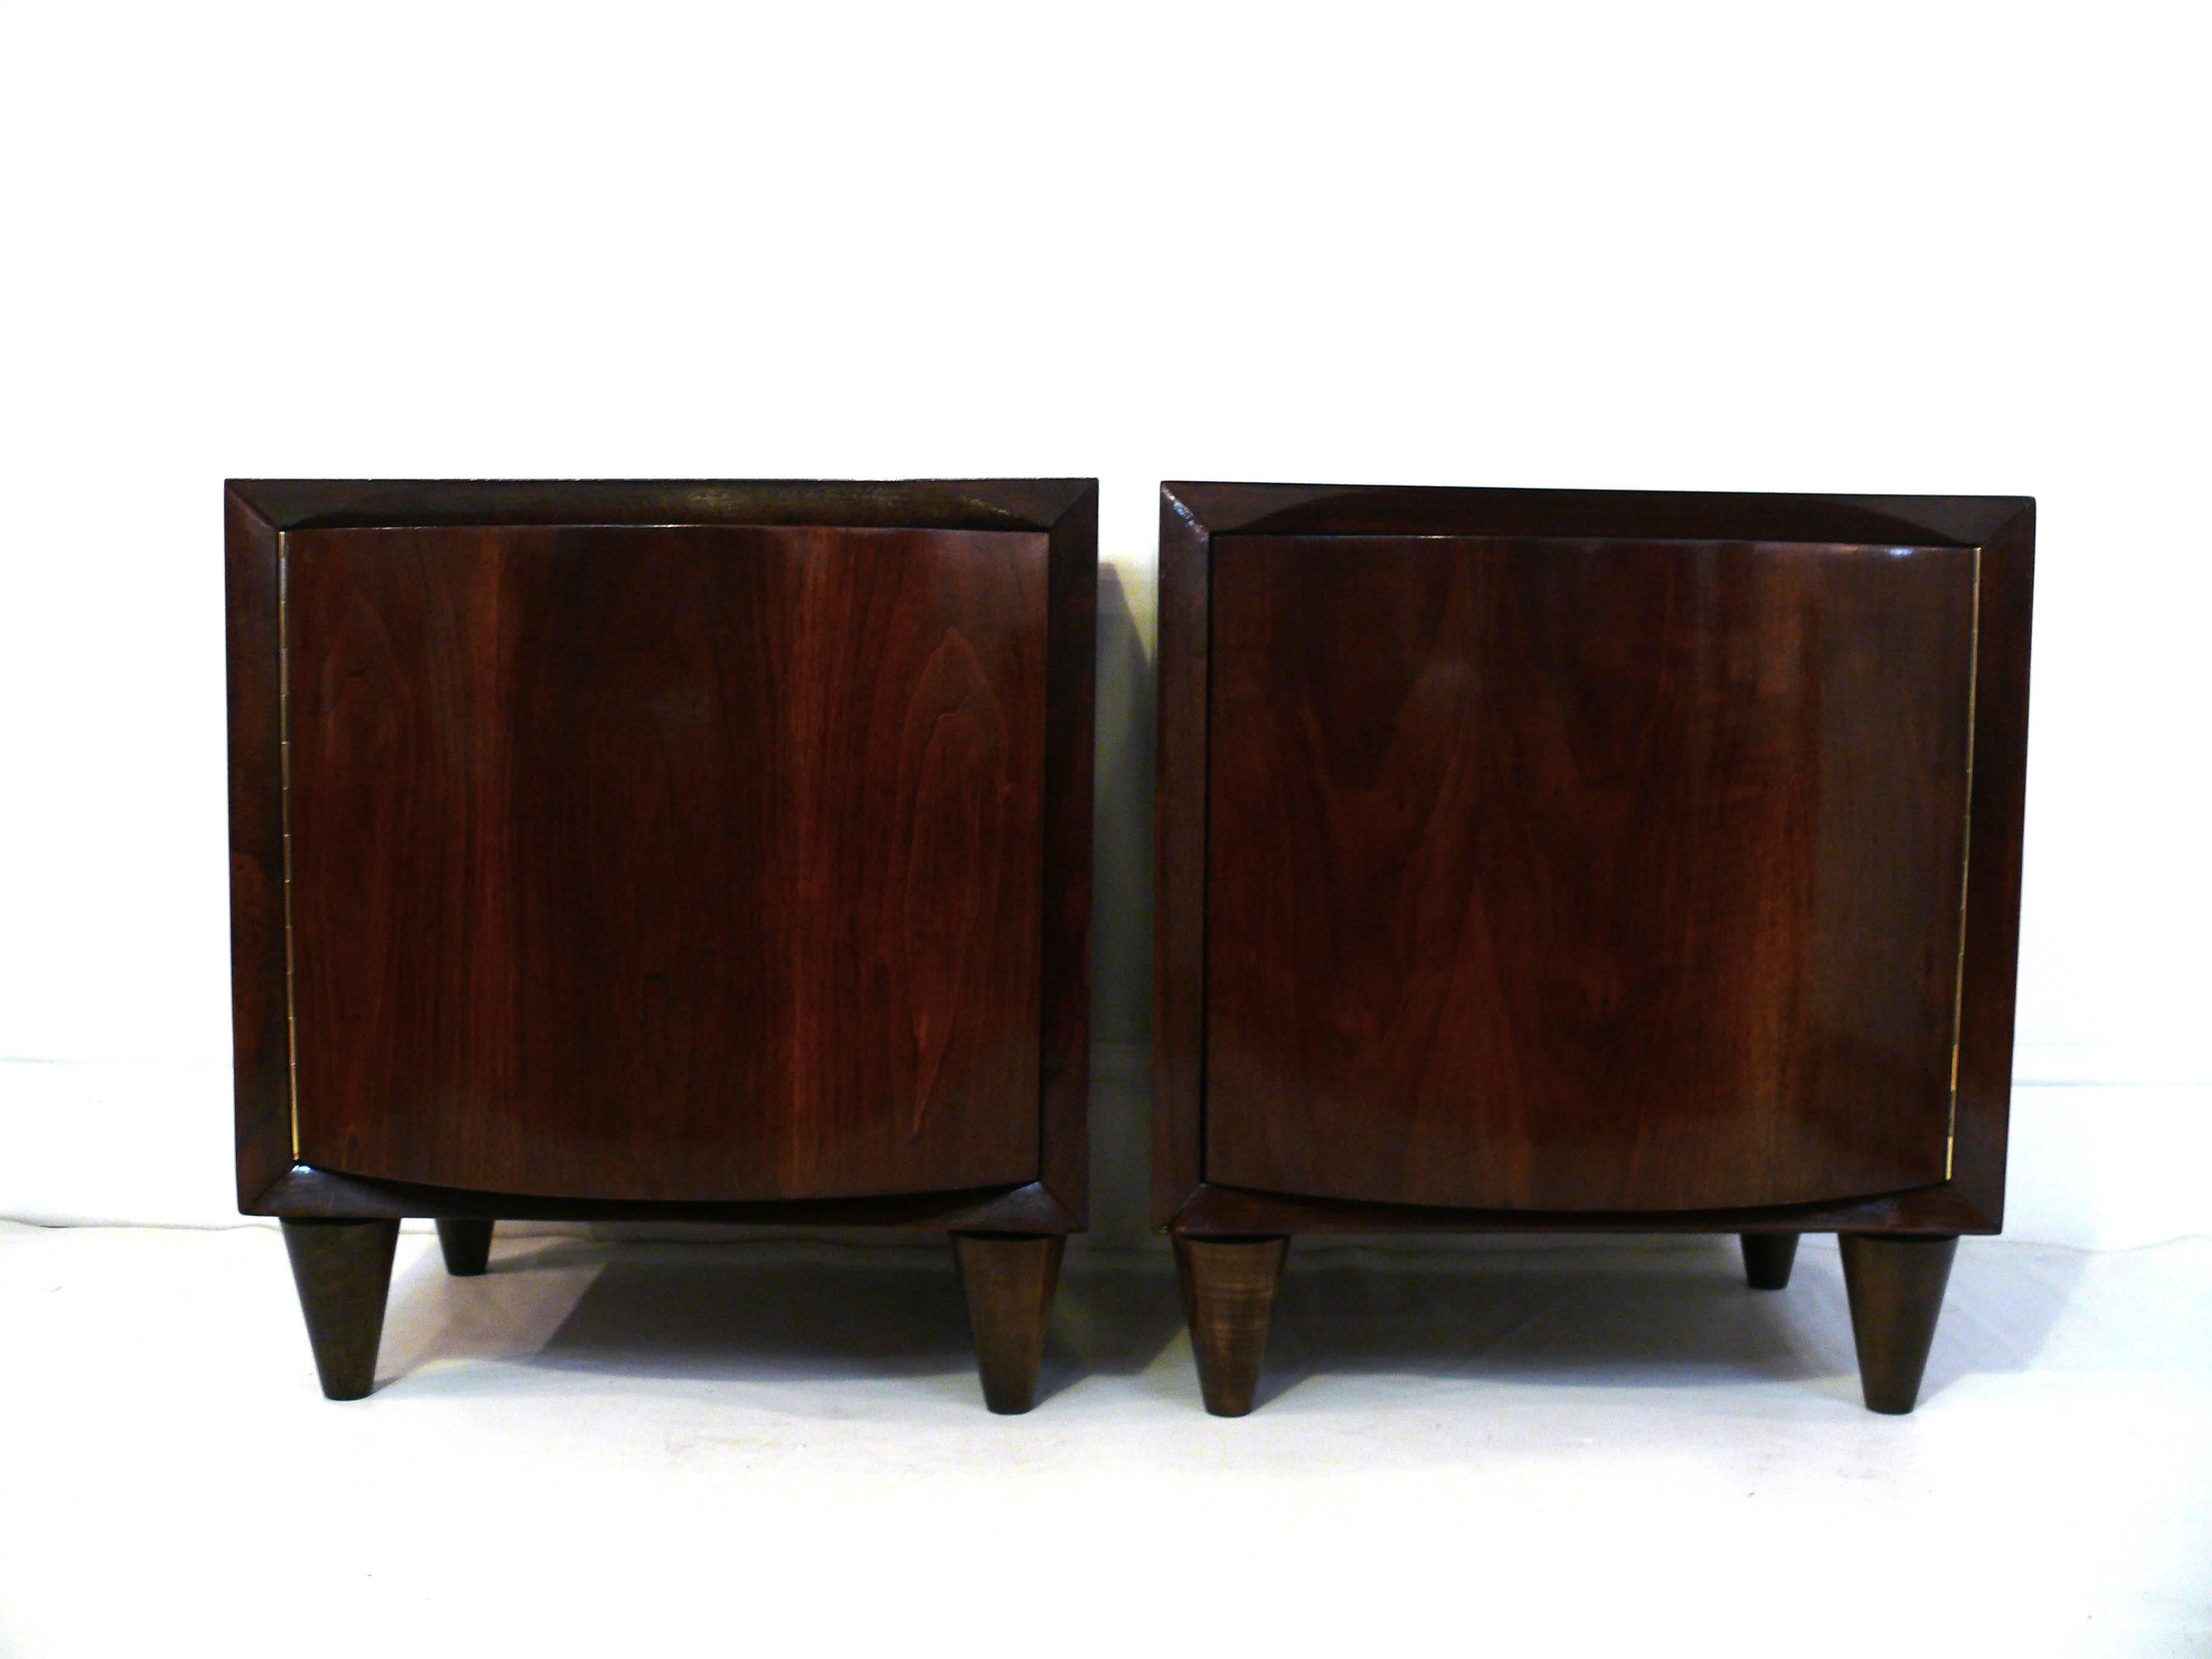 Pair of Modernage walnut bow front end tables. Great curved lines with single door.